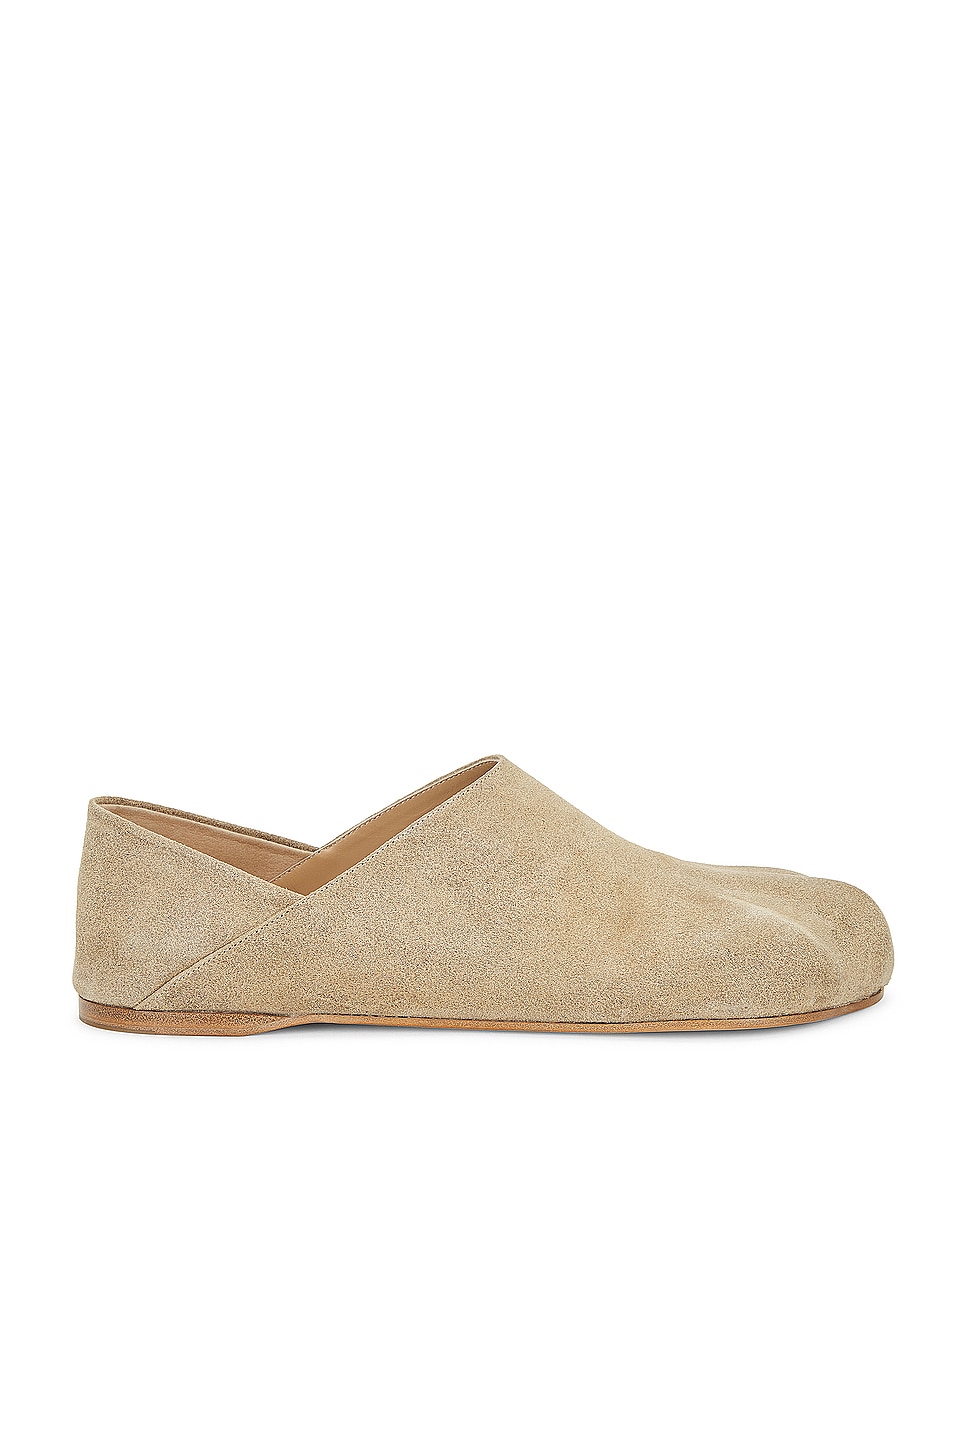 Image 1 of JW Anderson Paw Loafer in Taupe